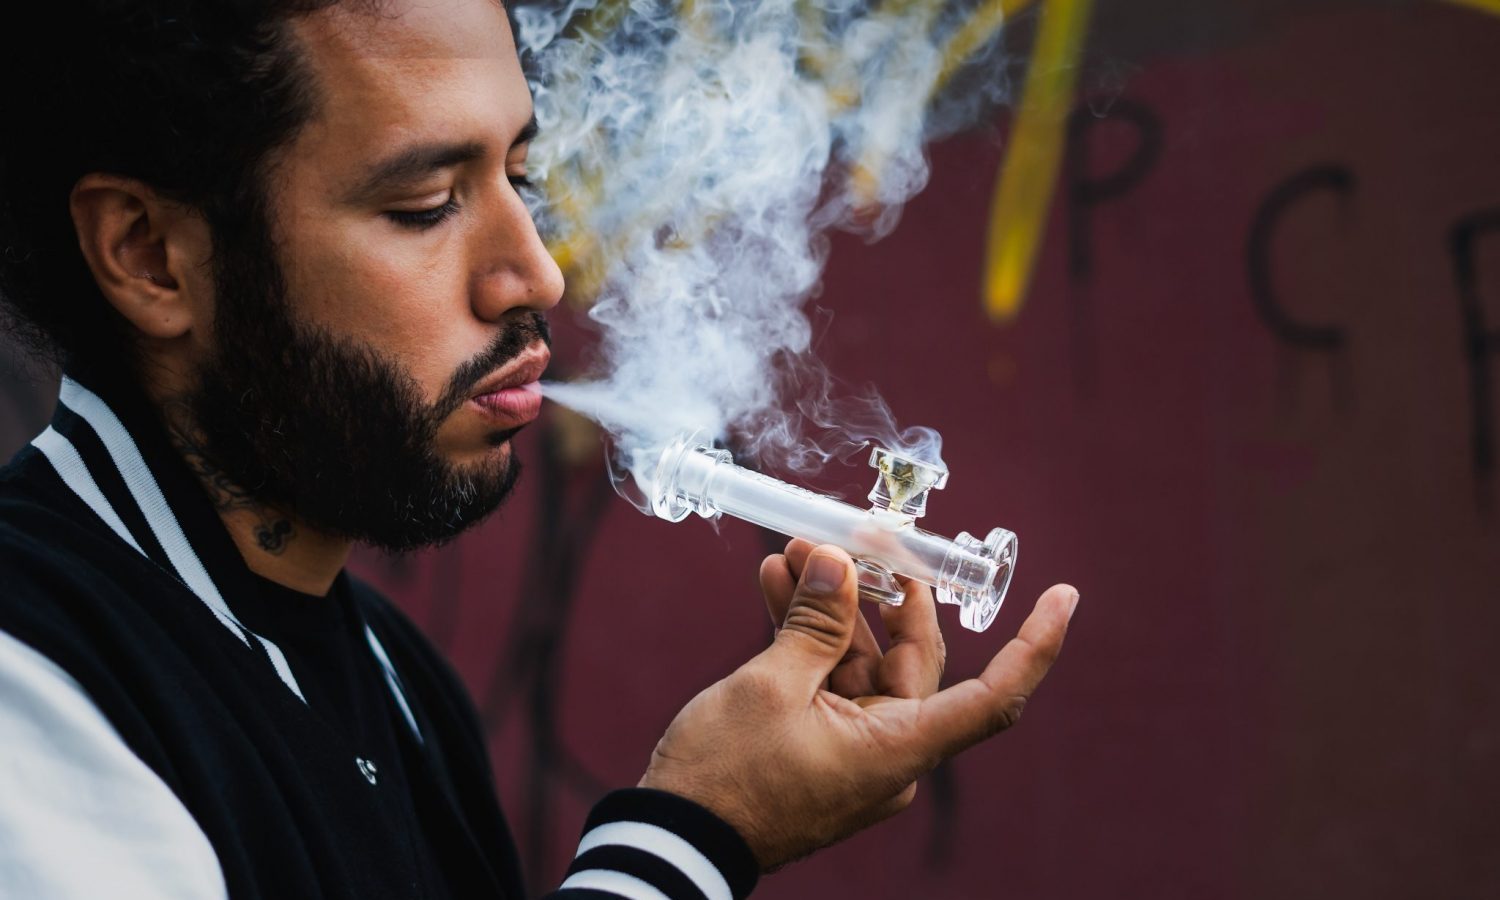 Bongs & Pipes: What's The Best Option For New Smokers?